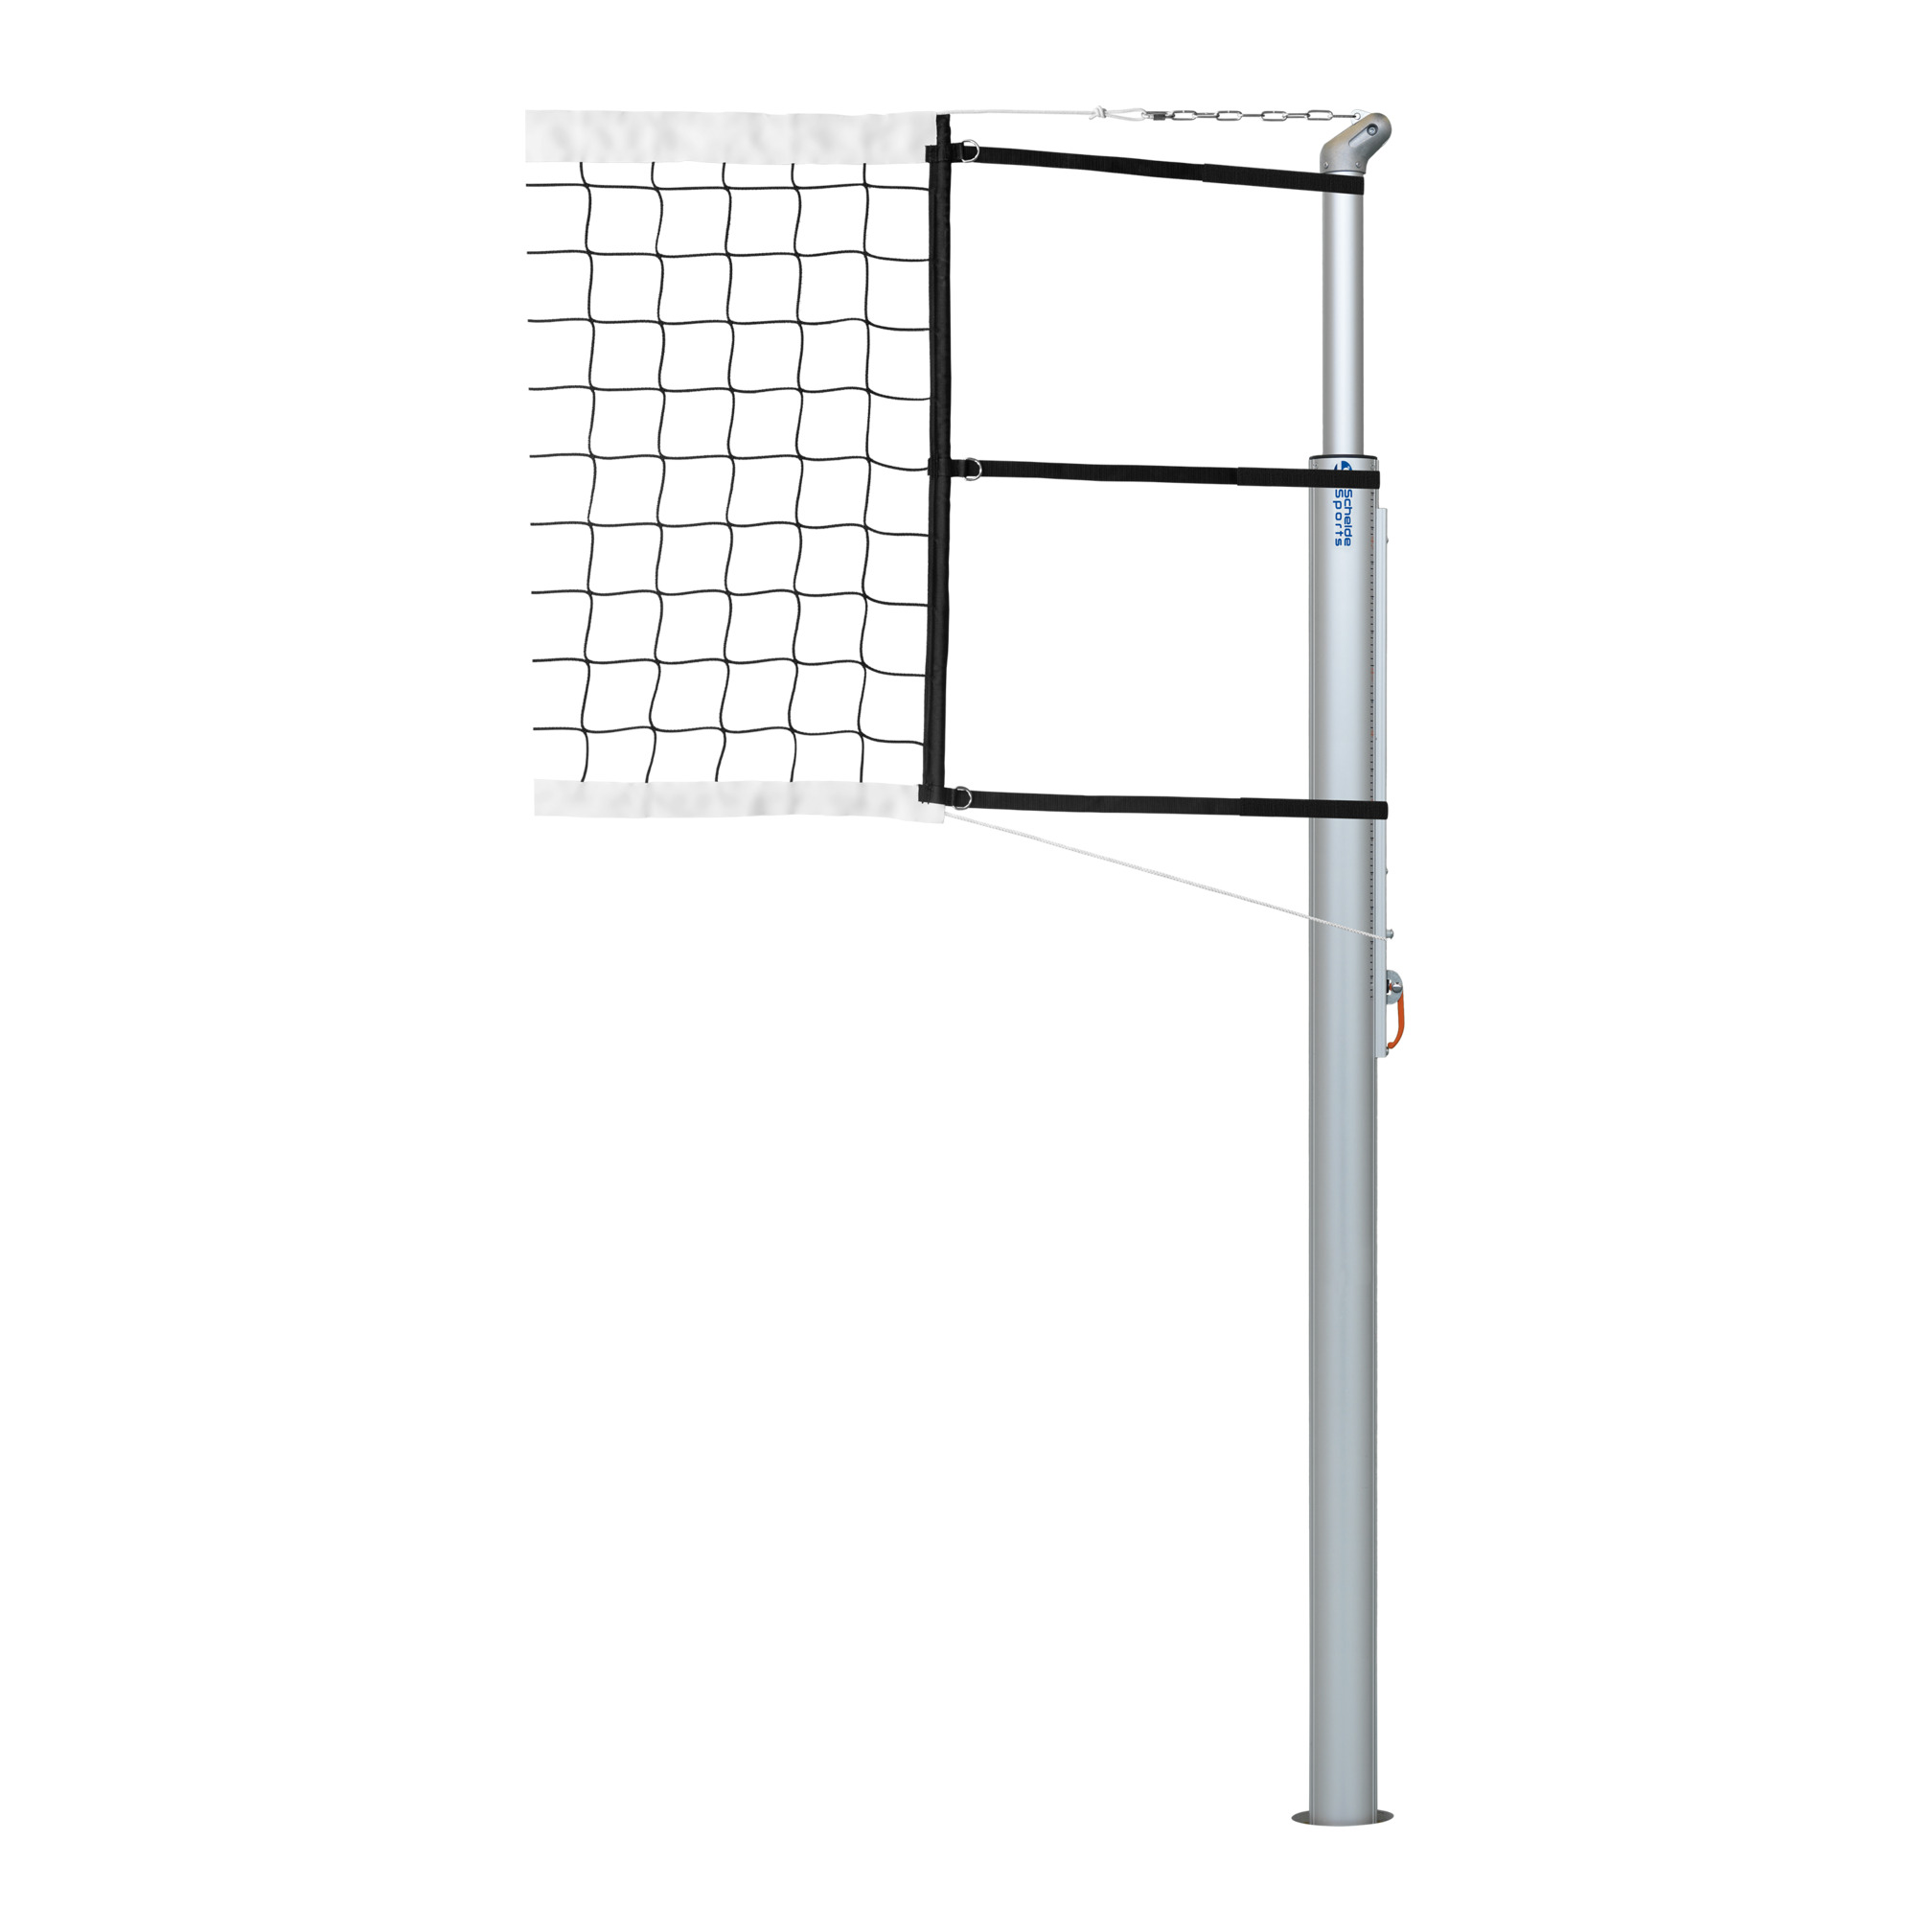 Competition volleyball net with velcro